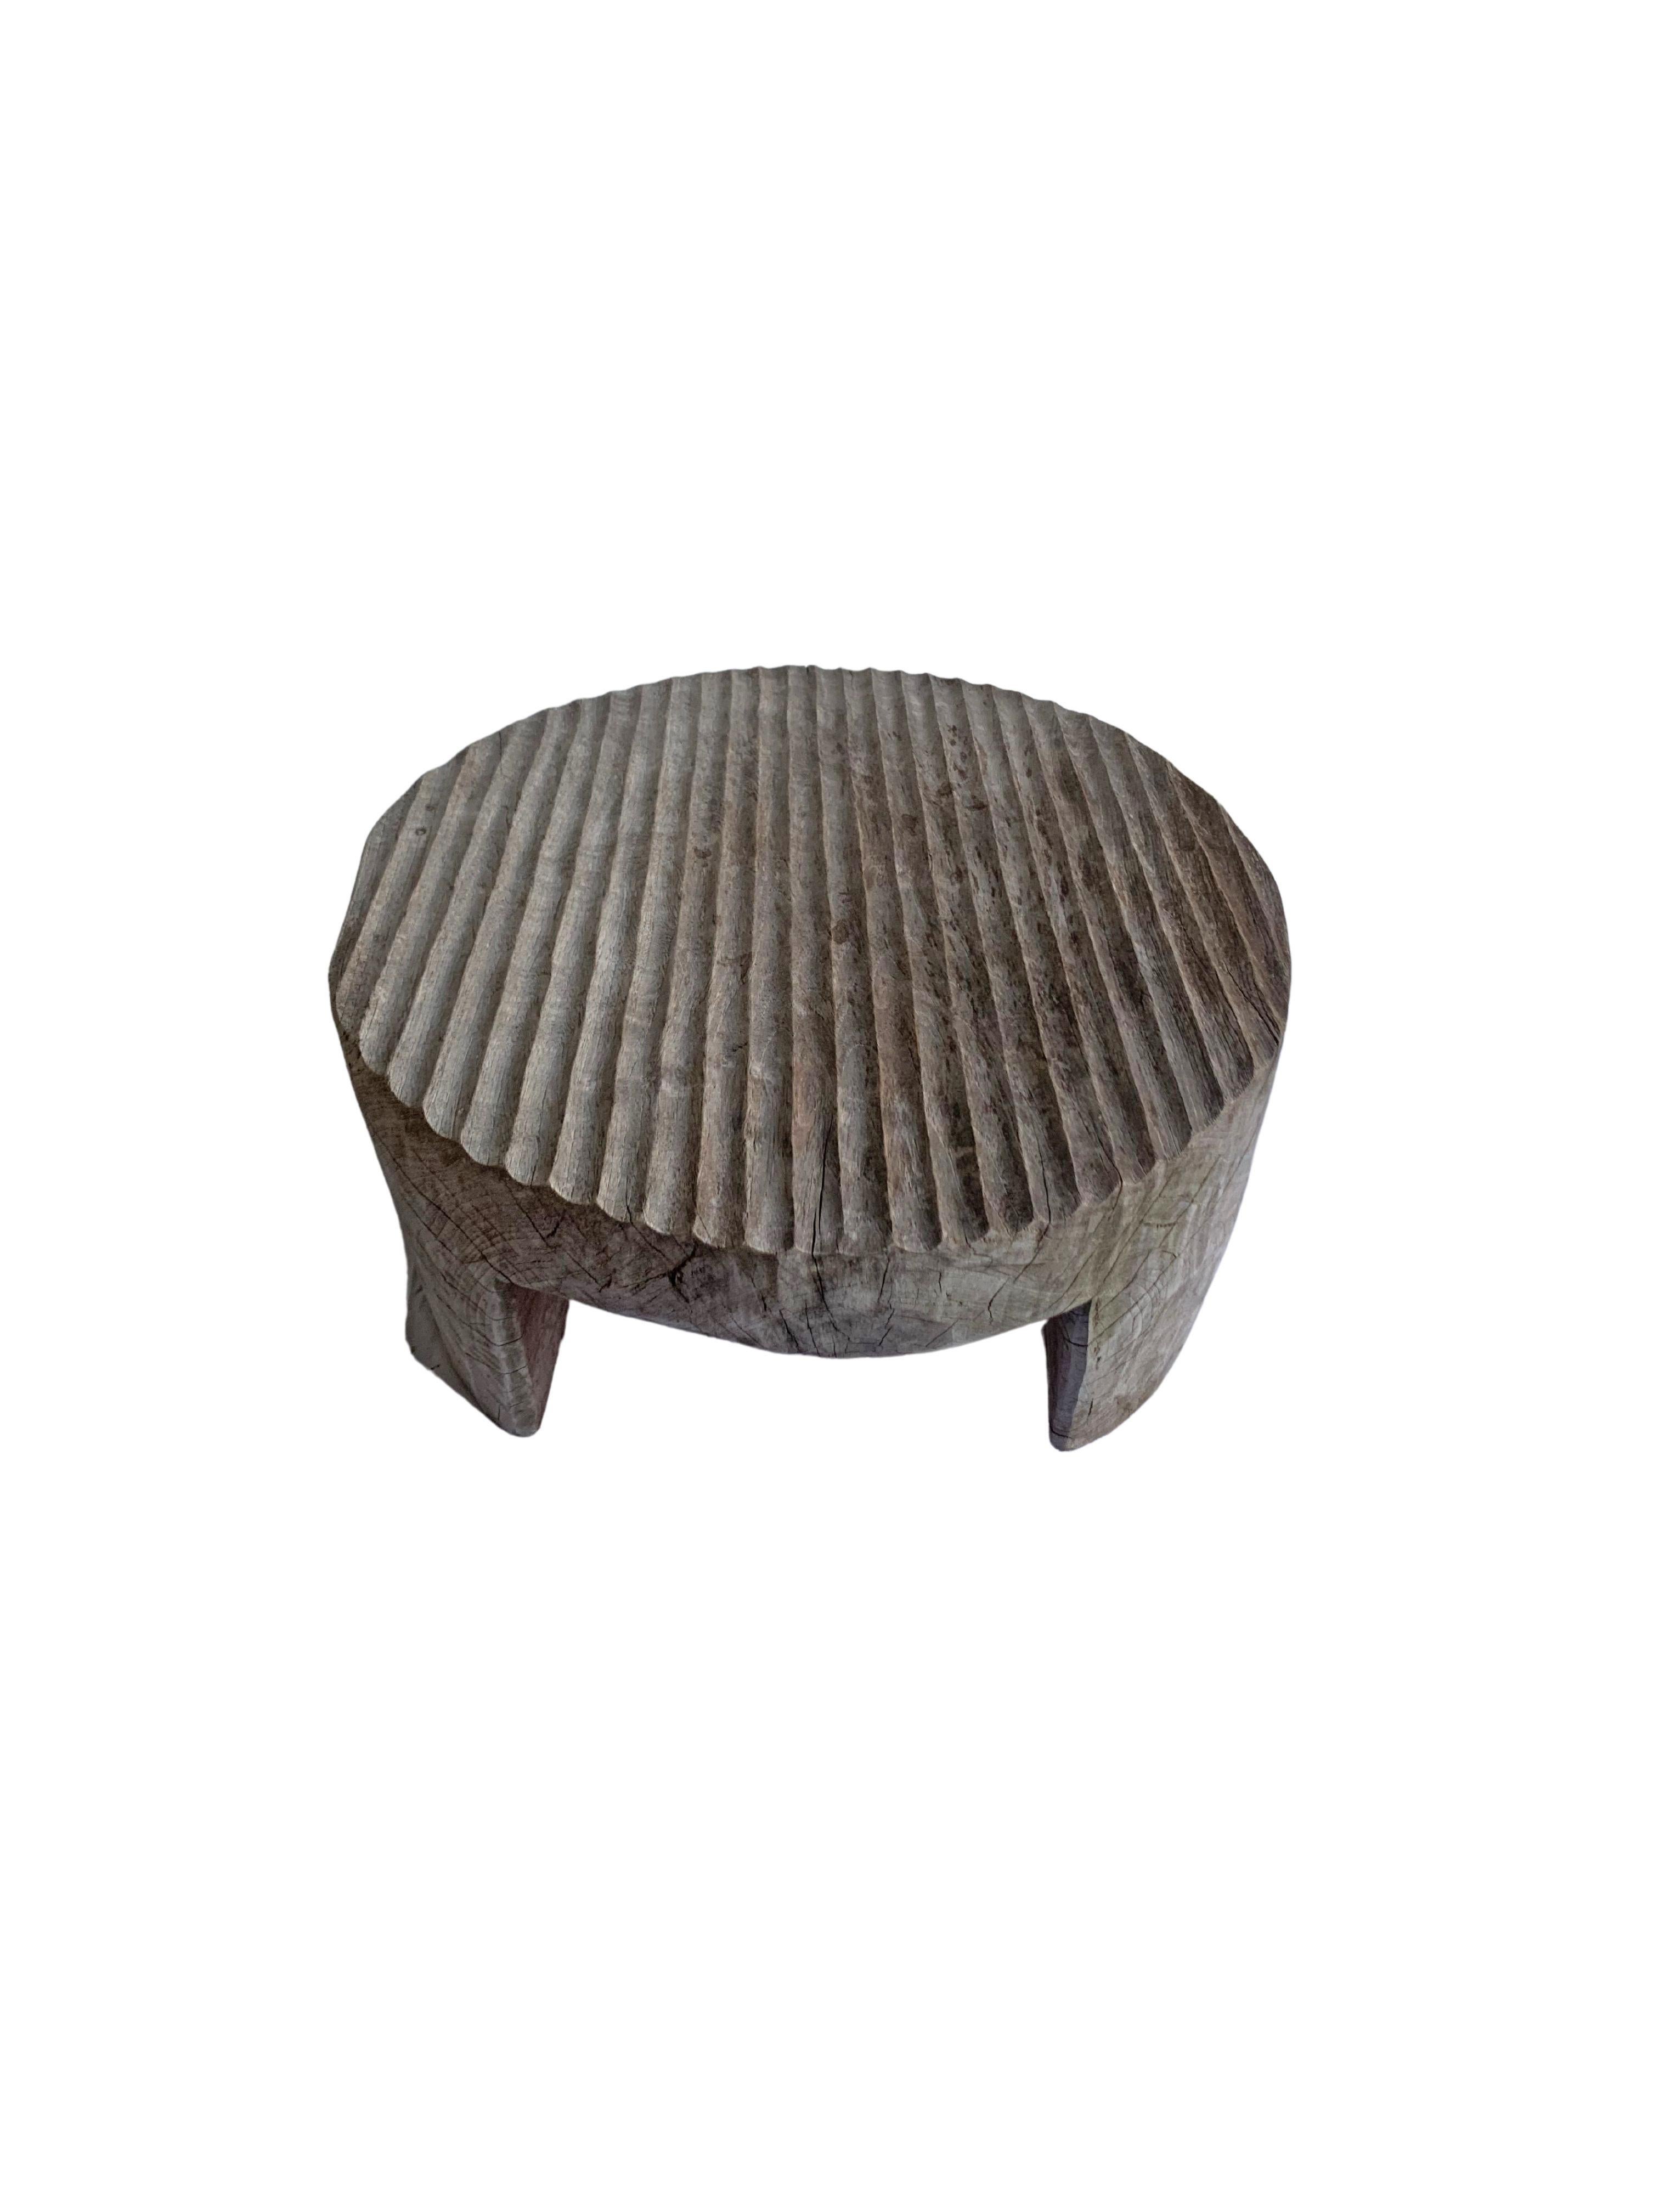 Sculptural Side Table Crafted from Solid Teak Wood with Ribbed Texture In Good Condition For Sale In Jimbaran, Bali